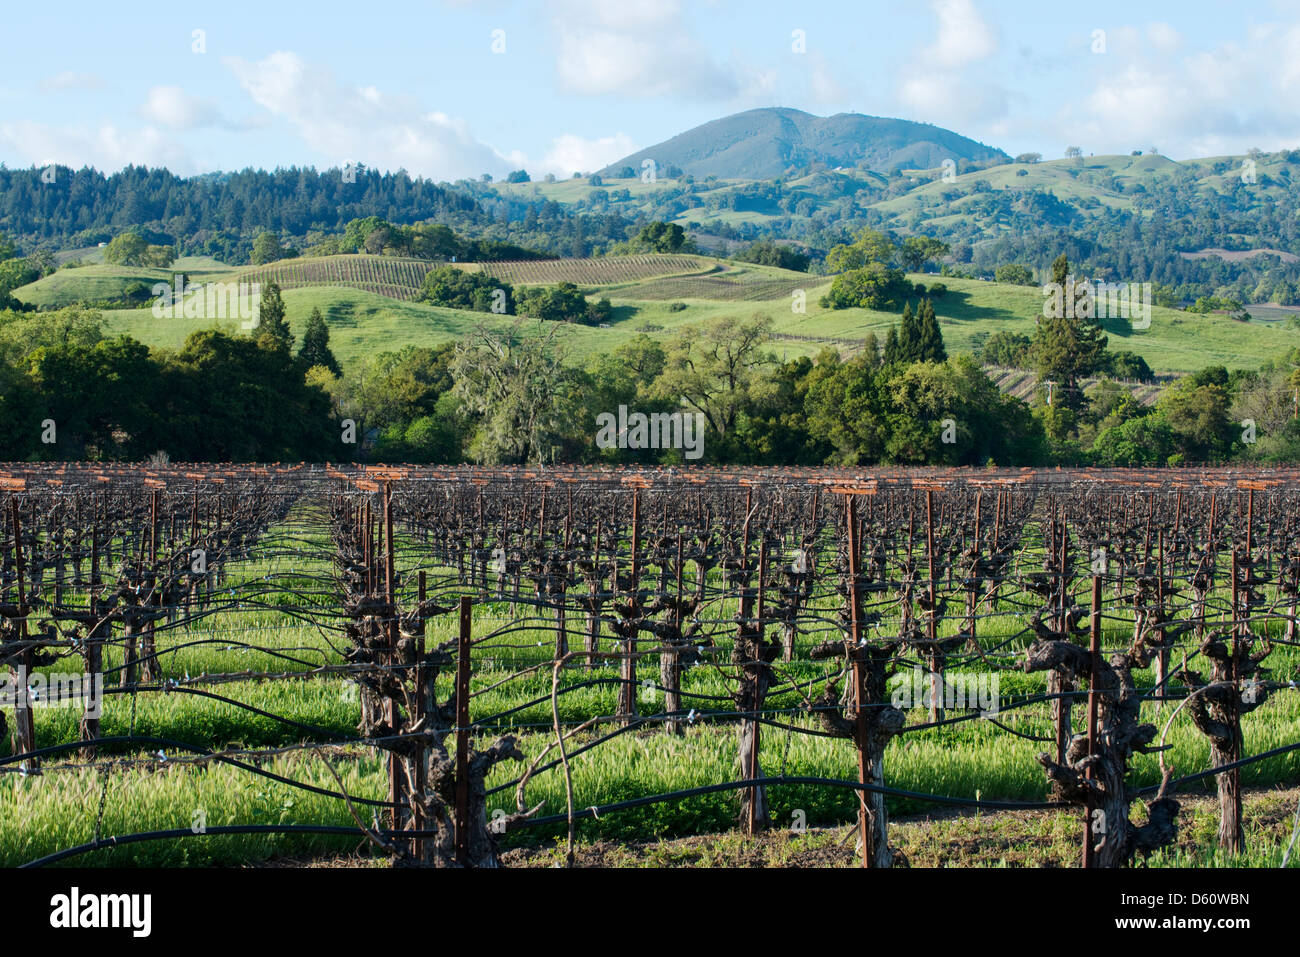 Looking out over a vineyard in the Alexander Valley appellation of the Sonoma Wine Country in the Spring near Healdsburg, CA. Stock Photo